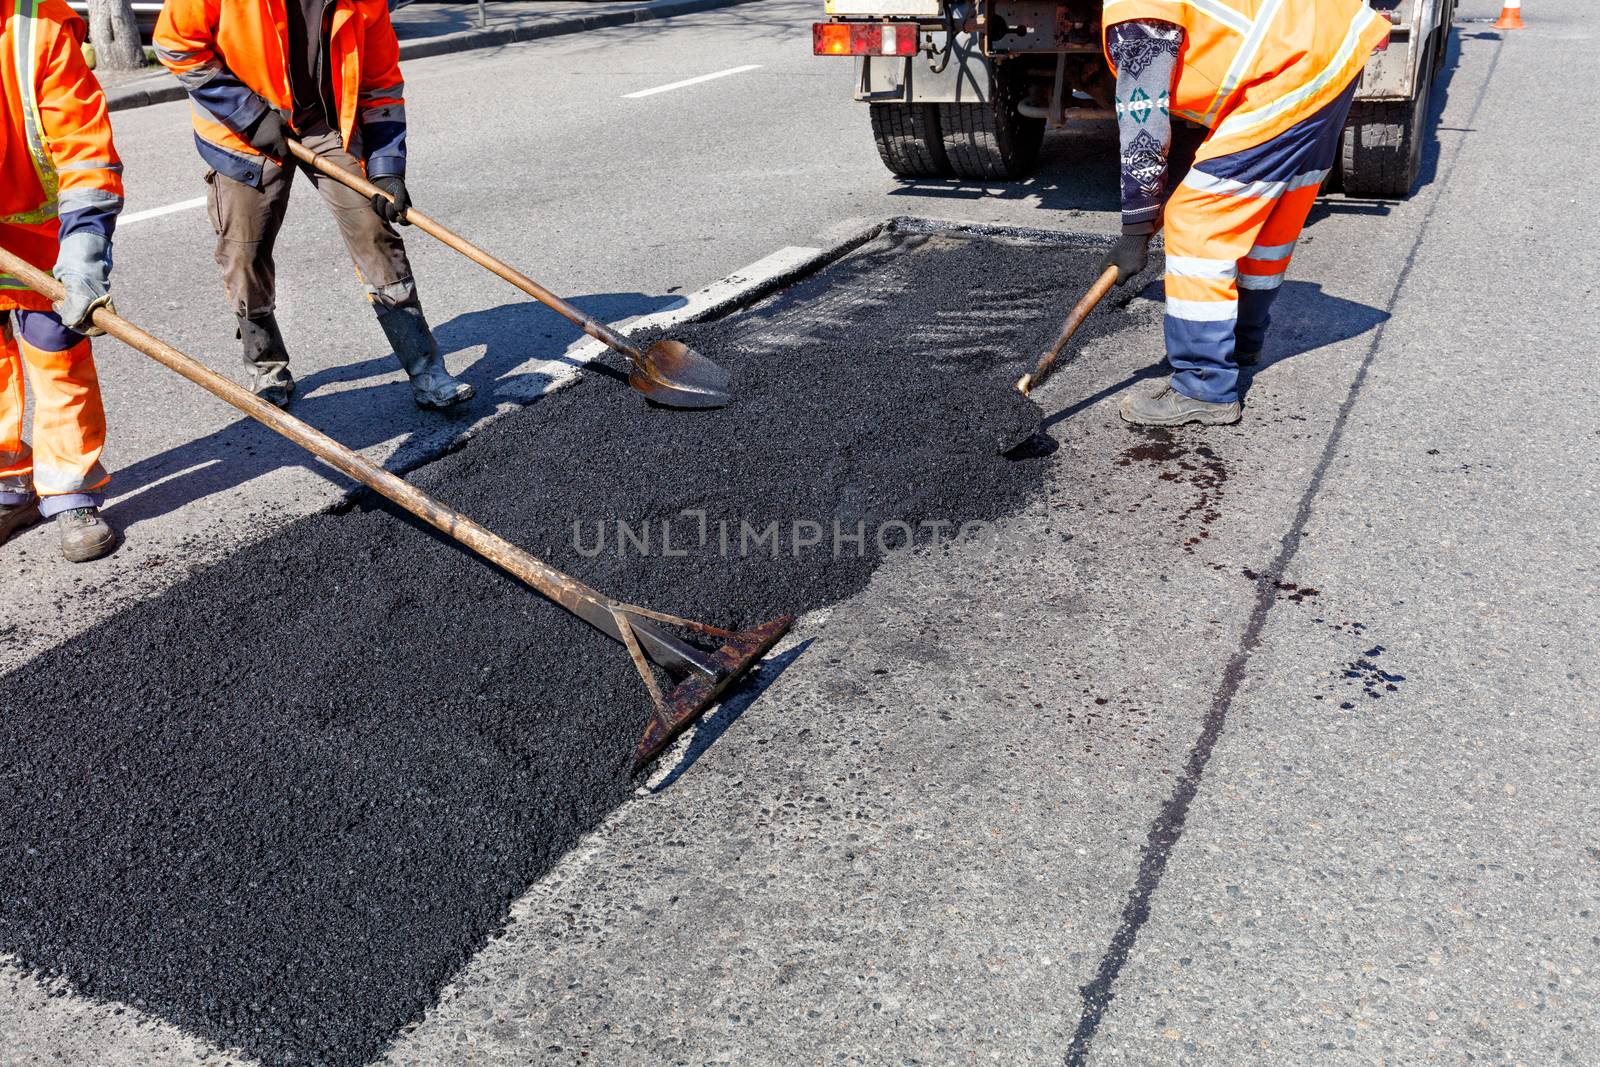 The workers' brigade clears a part of the asphalt with shovels in road construction by Sergii